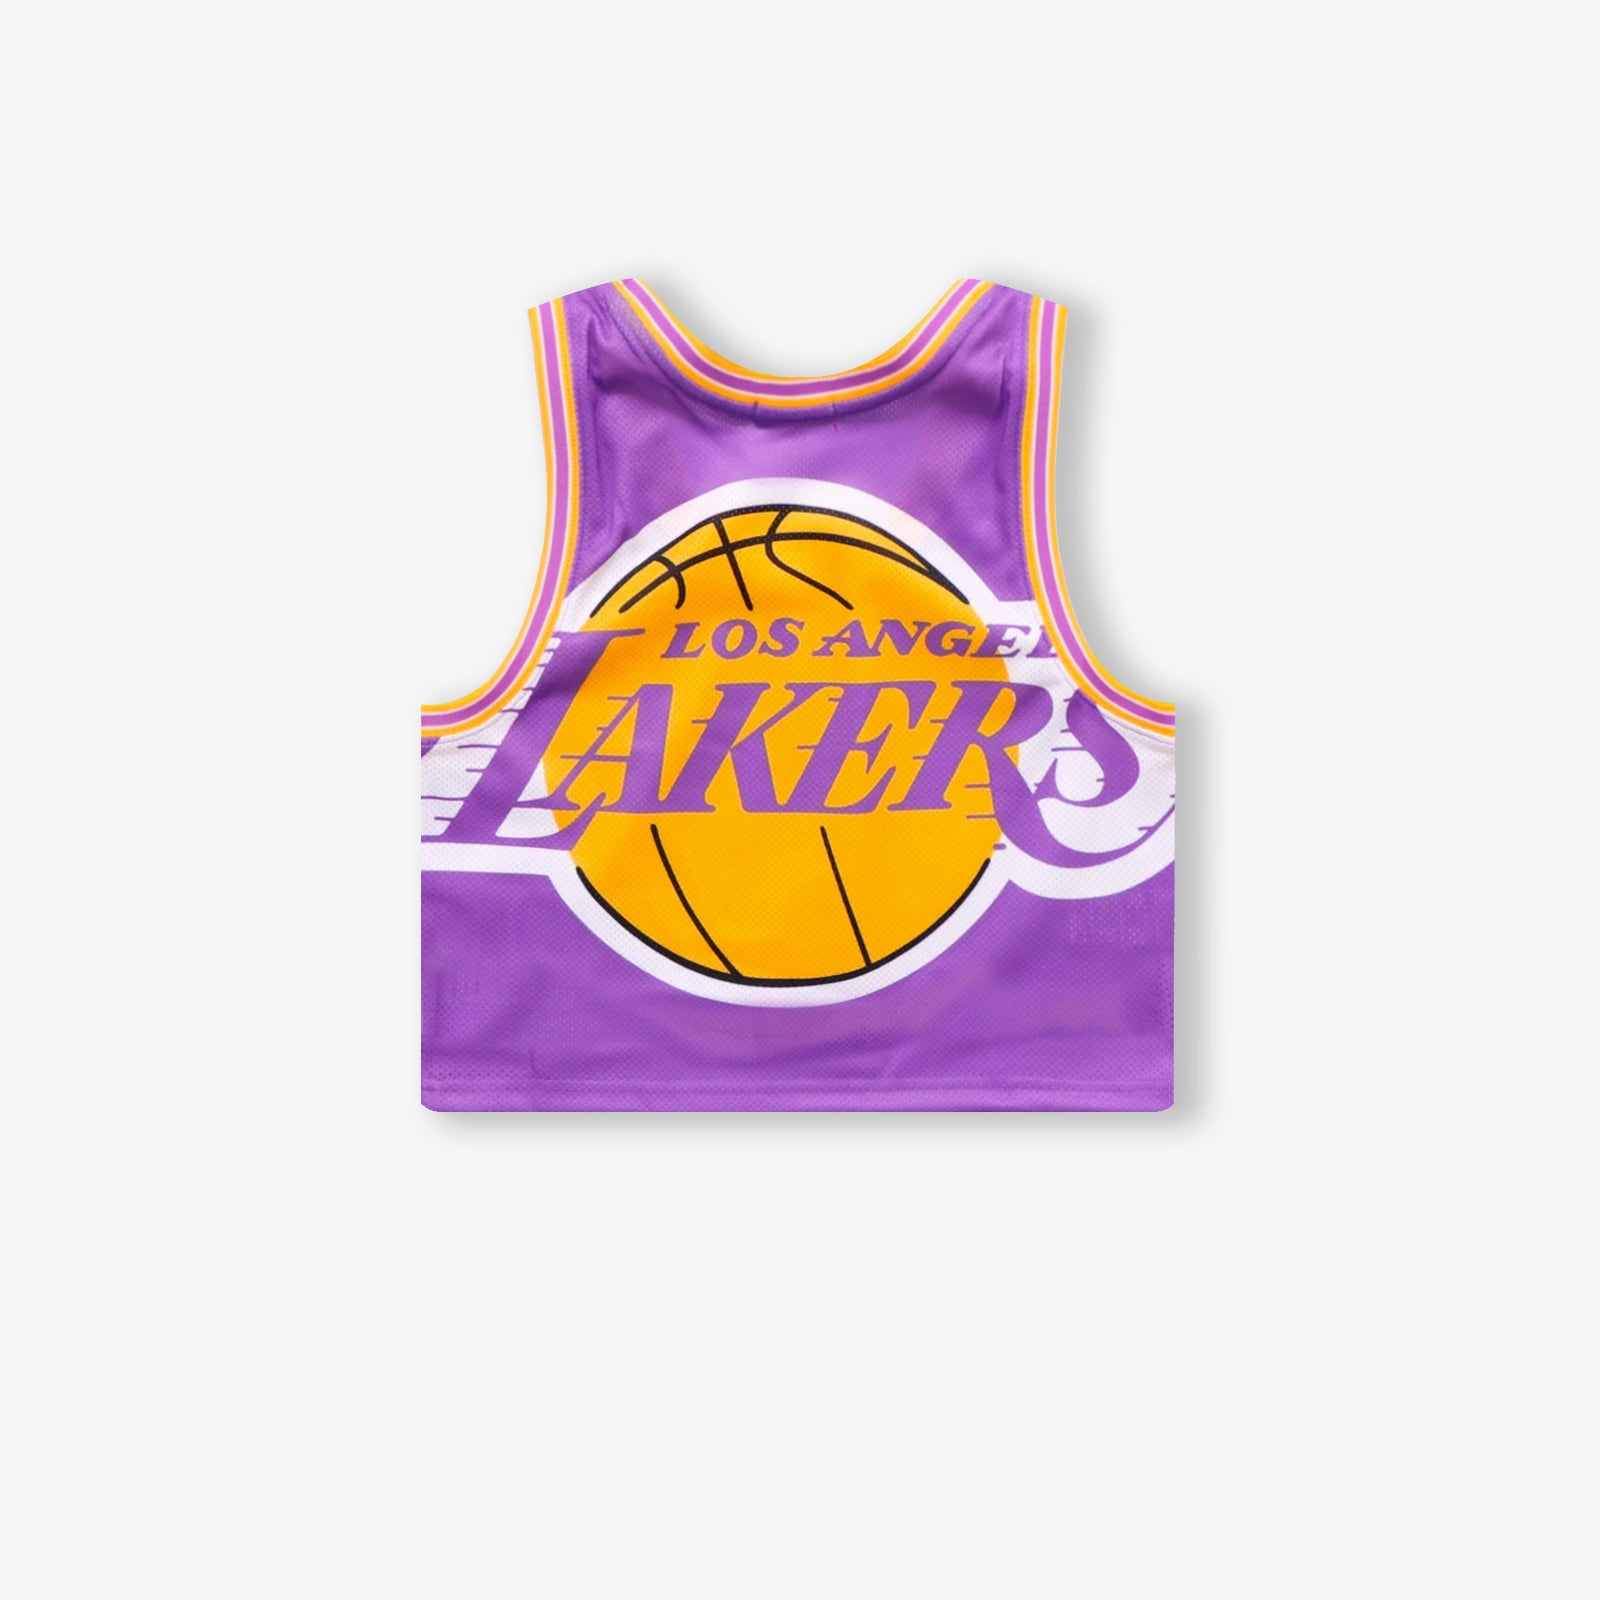 Los Angeles Lakers Mesh Jersey- Large